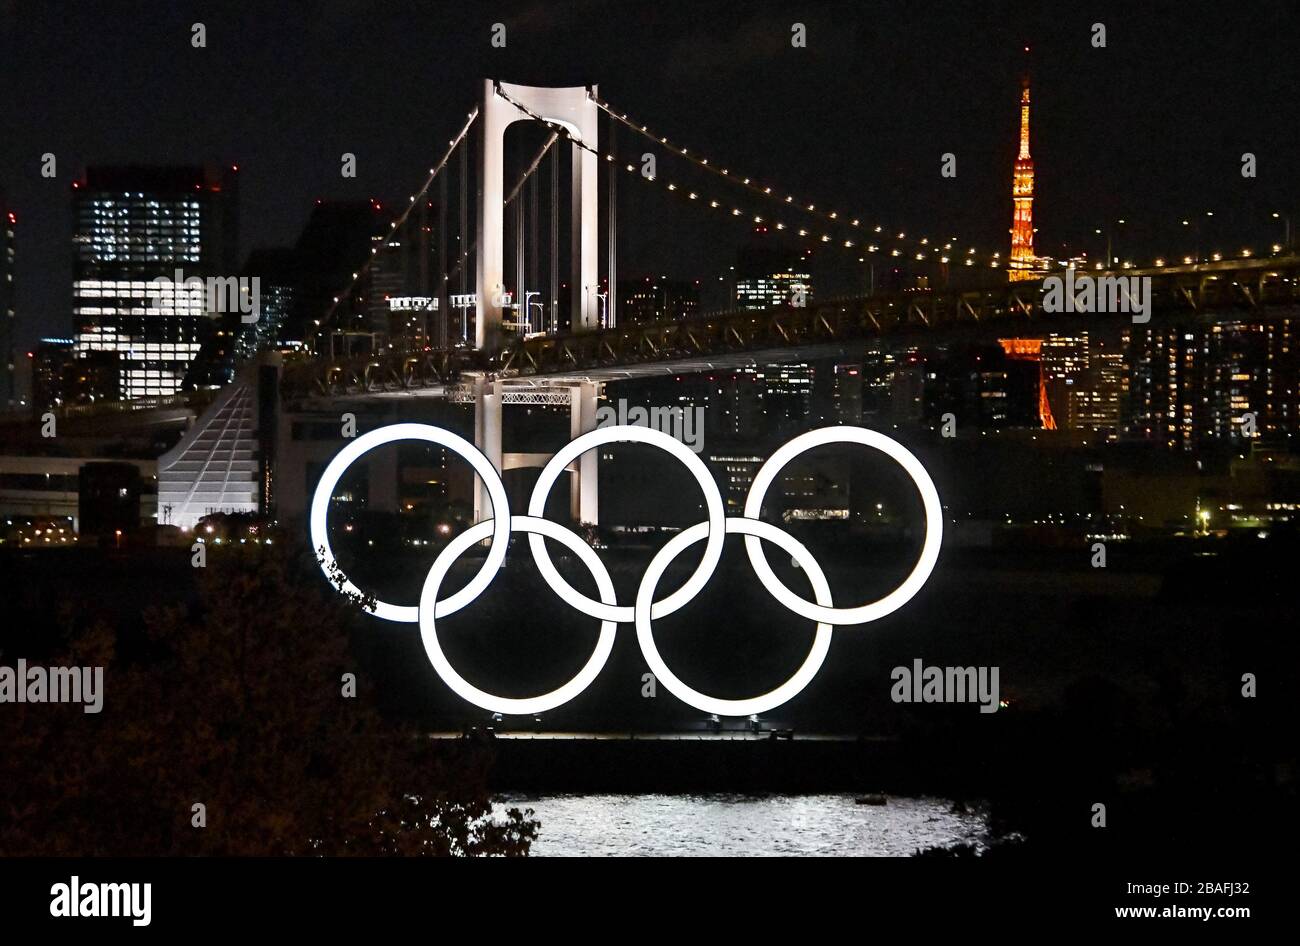 The Olympic rings are seen at Odaiba Marine Park in Tokyo, Japan on Friday, March 27, 2020. Japan's government and International Olympic Committee agreed to postpone the Tokyo 2020 Olympic Games until 2021 because of the spreading Coronavirus pandemic. Photo by Keizo Mori/UPI Stock Photo